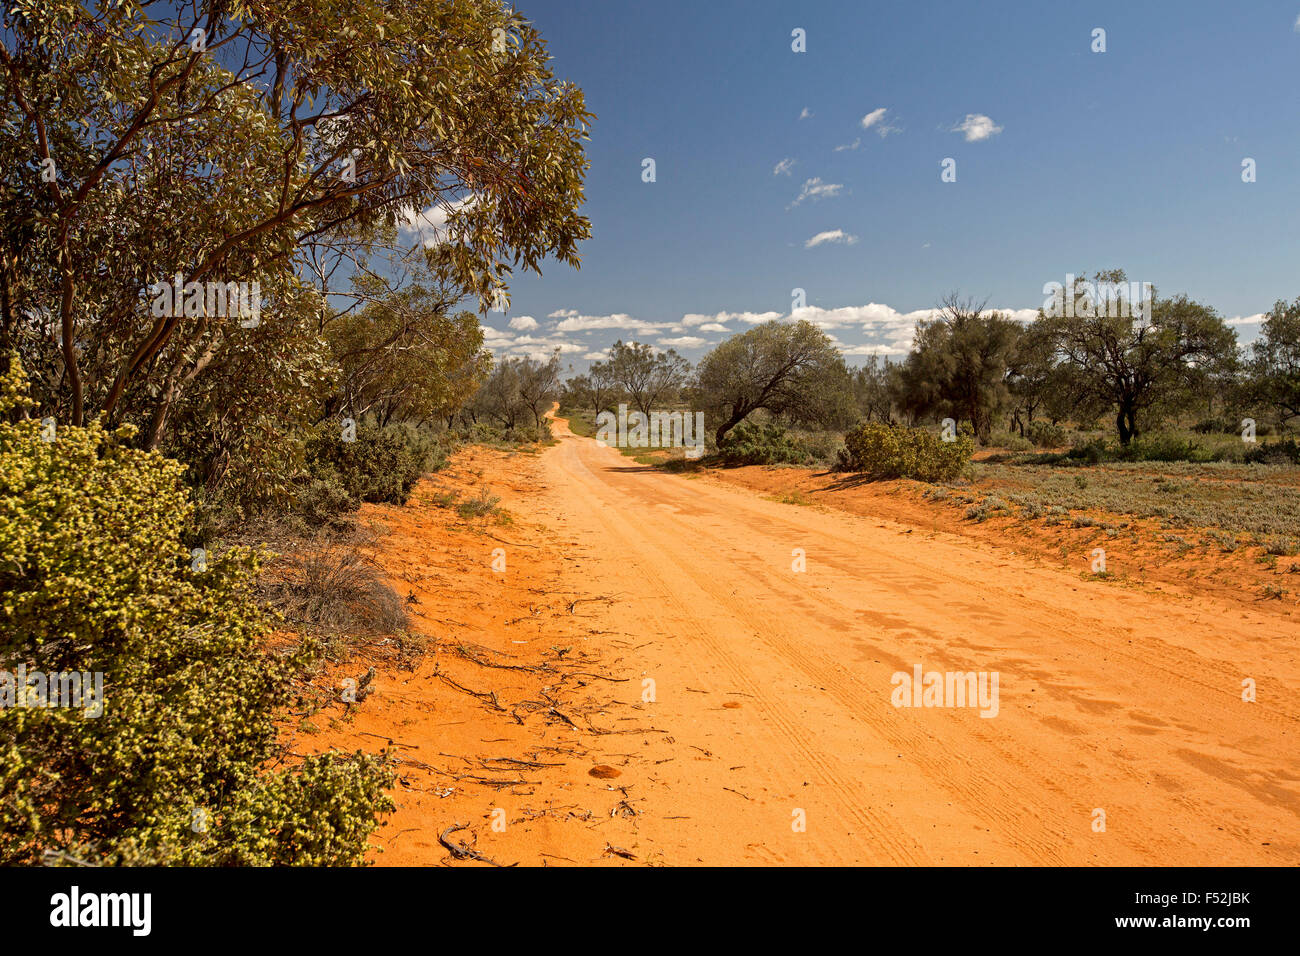 Long red sandy road, hemmed by native woodlands, stretching to horizon & blue sky at Mungo National Park in outback Australia Stock Photo